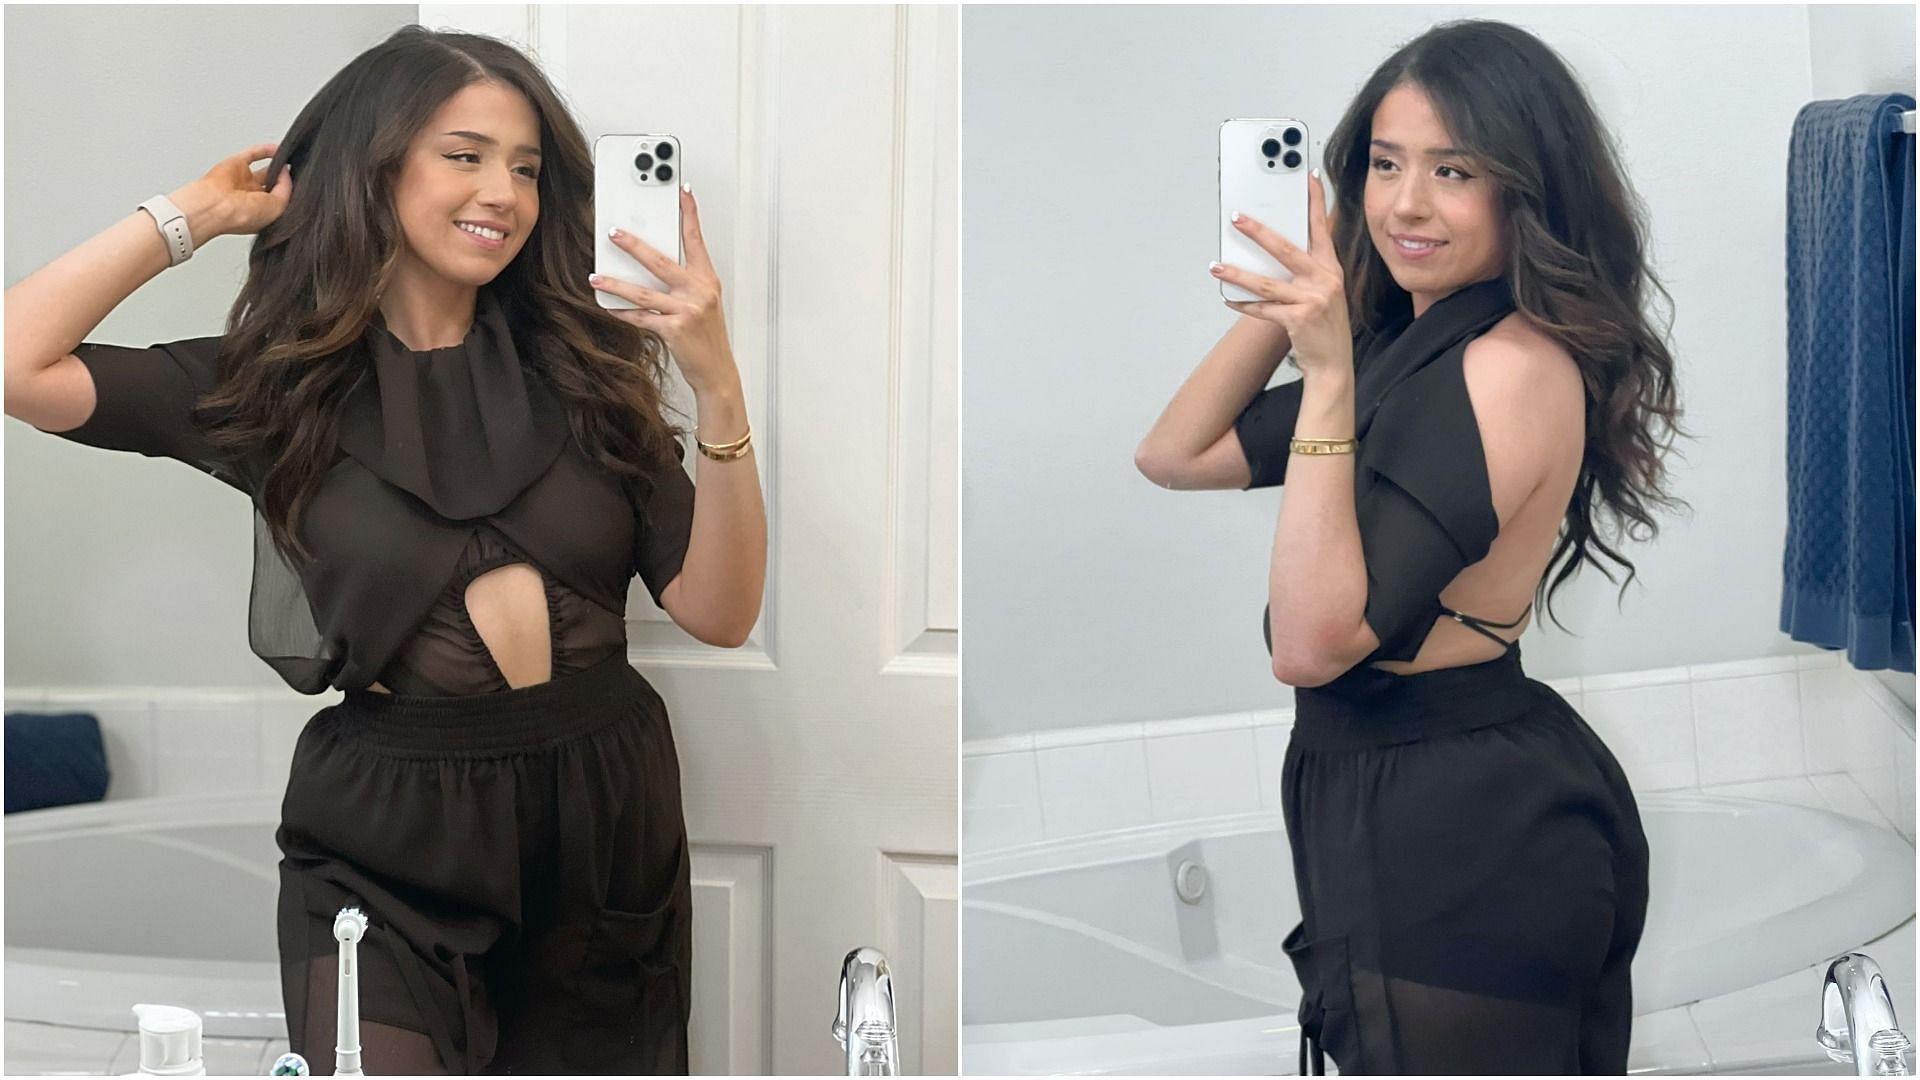 Pokimane shows off her new backless outfit (Image via Pokimane/Twitter)